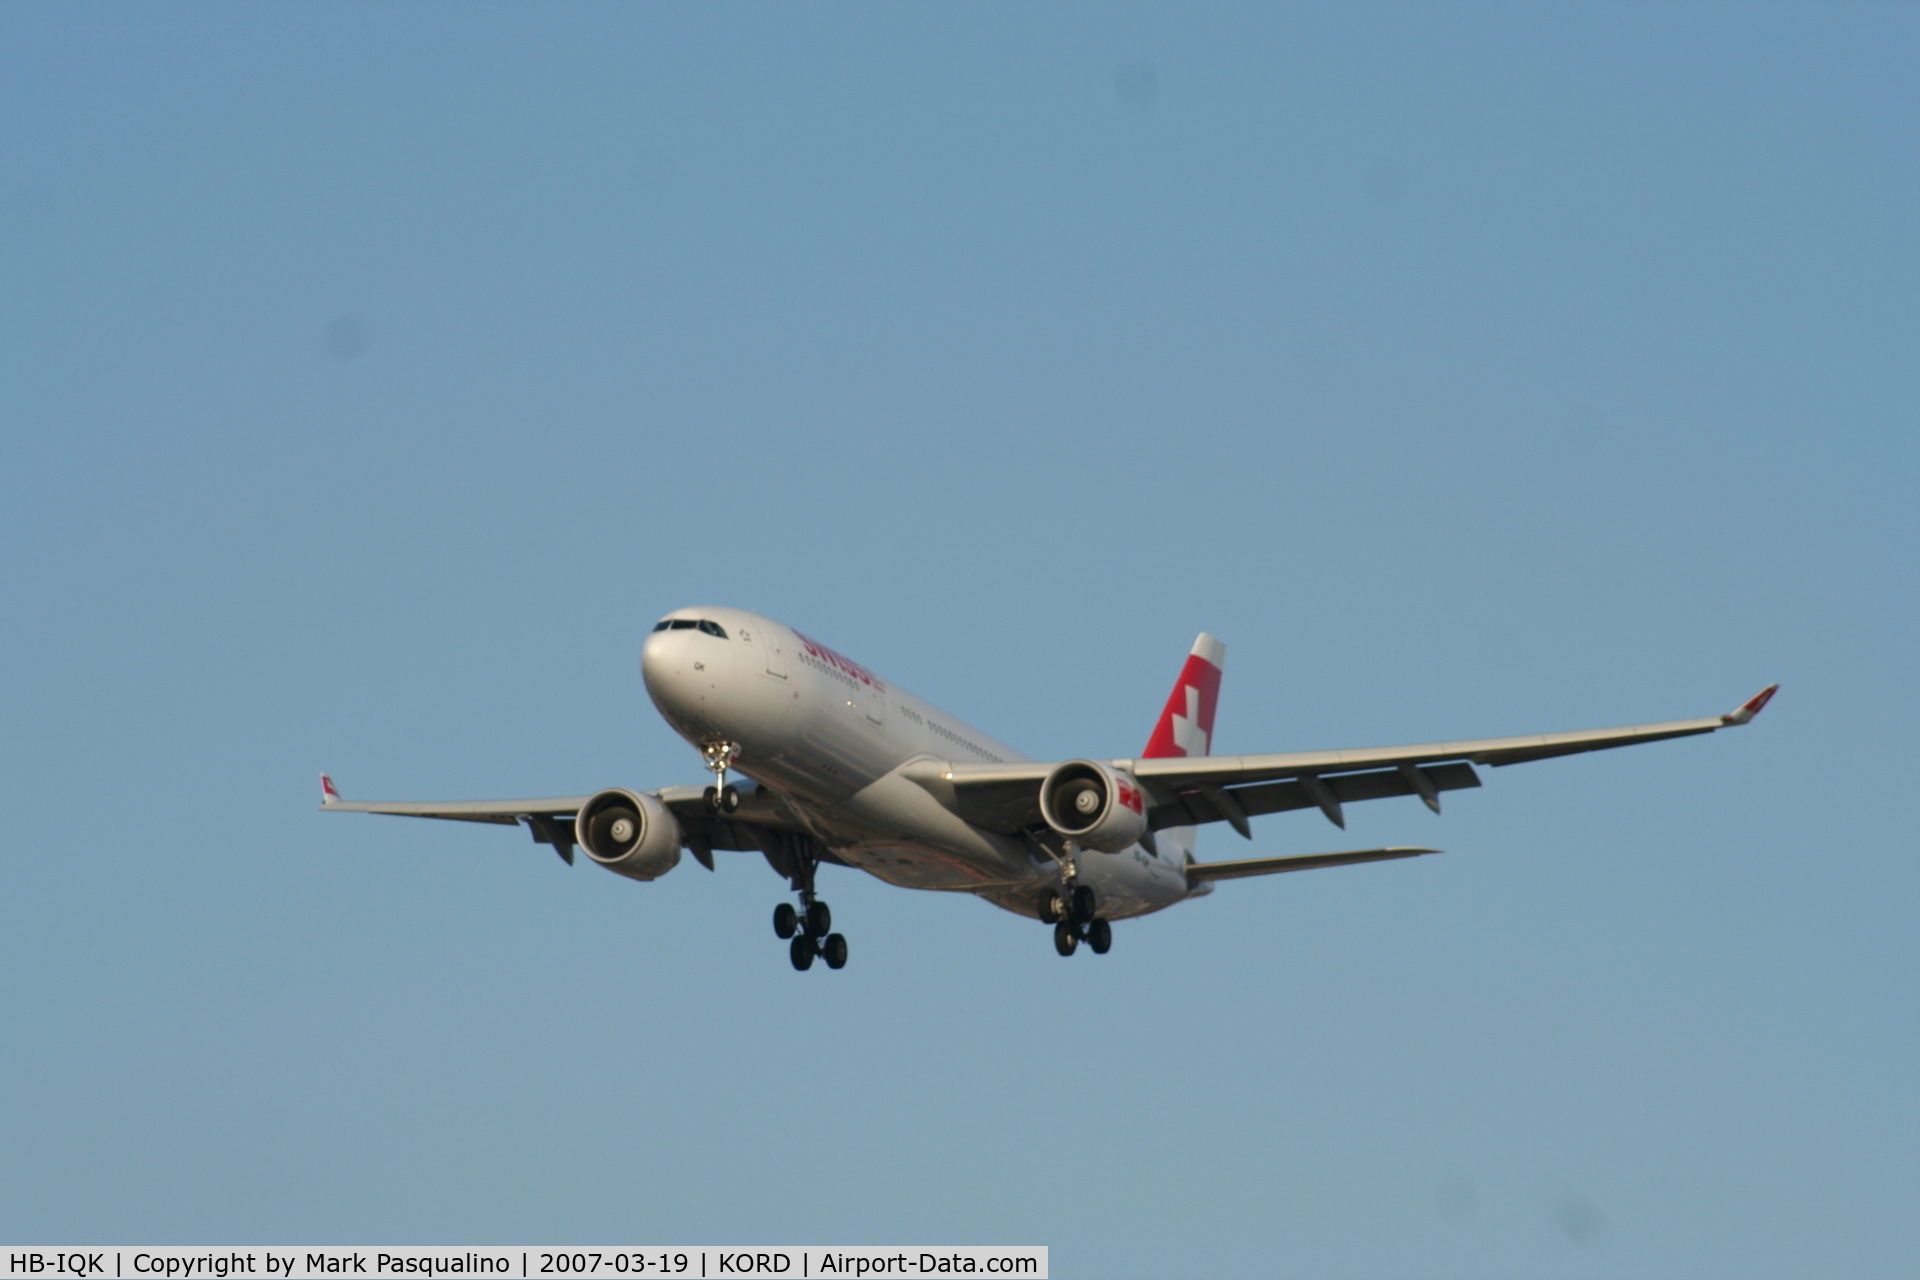 HB-IQK, 1999 Airbus A330-223 C/N 299, Airbus A330-200